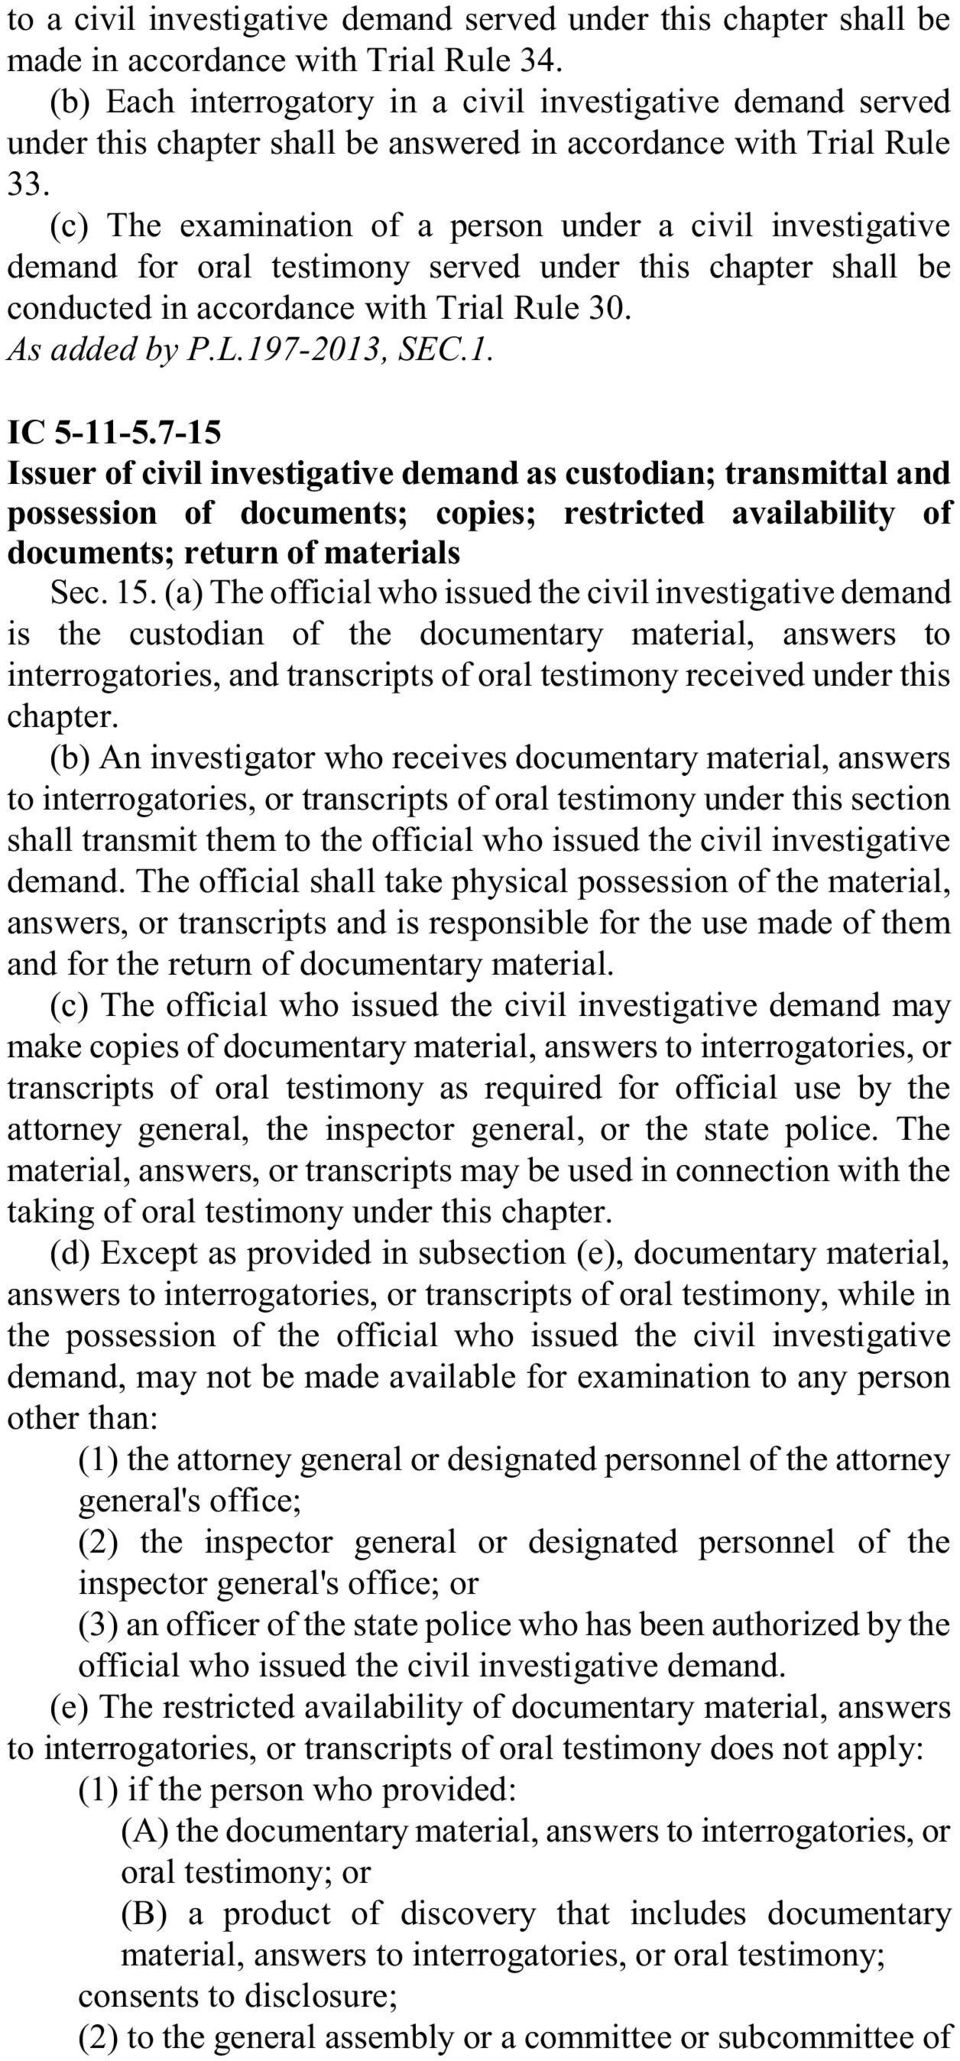 (c) The examination of a person under a civil investigative demand for oral testimony served under this chapter shall be conducted in accordance with Trial Rule 30. IC 5-11-5.